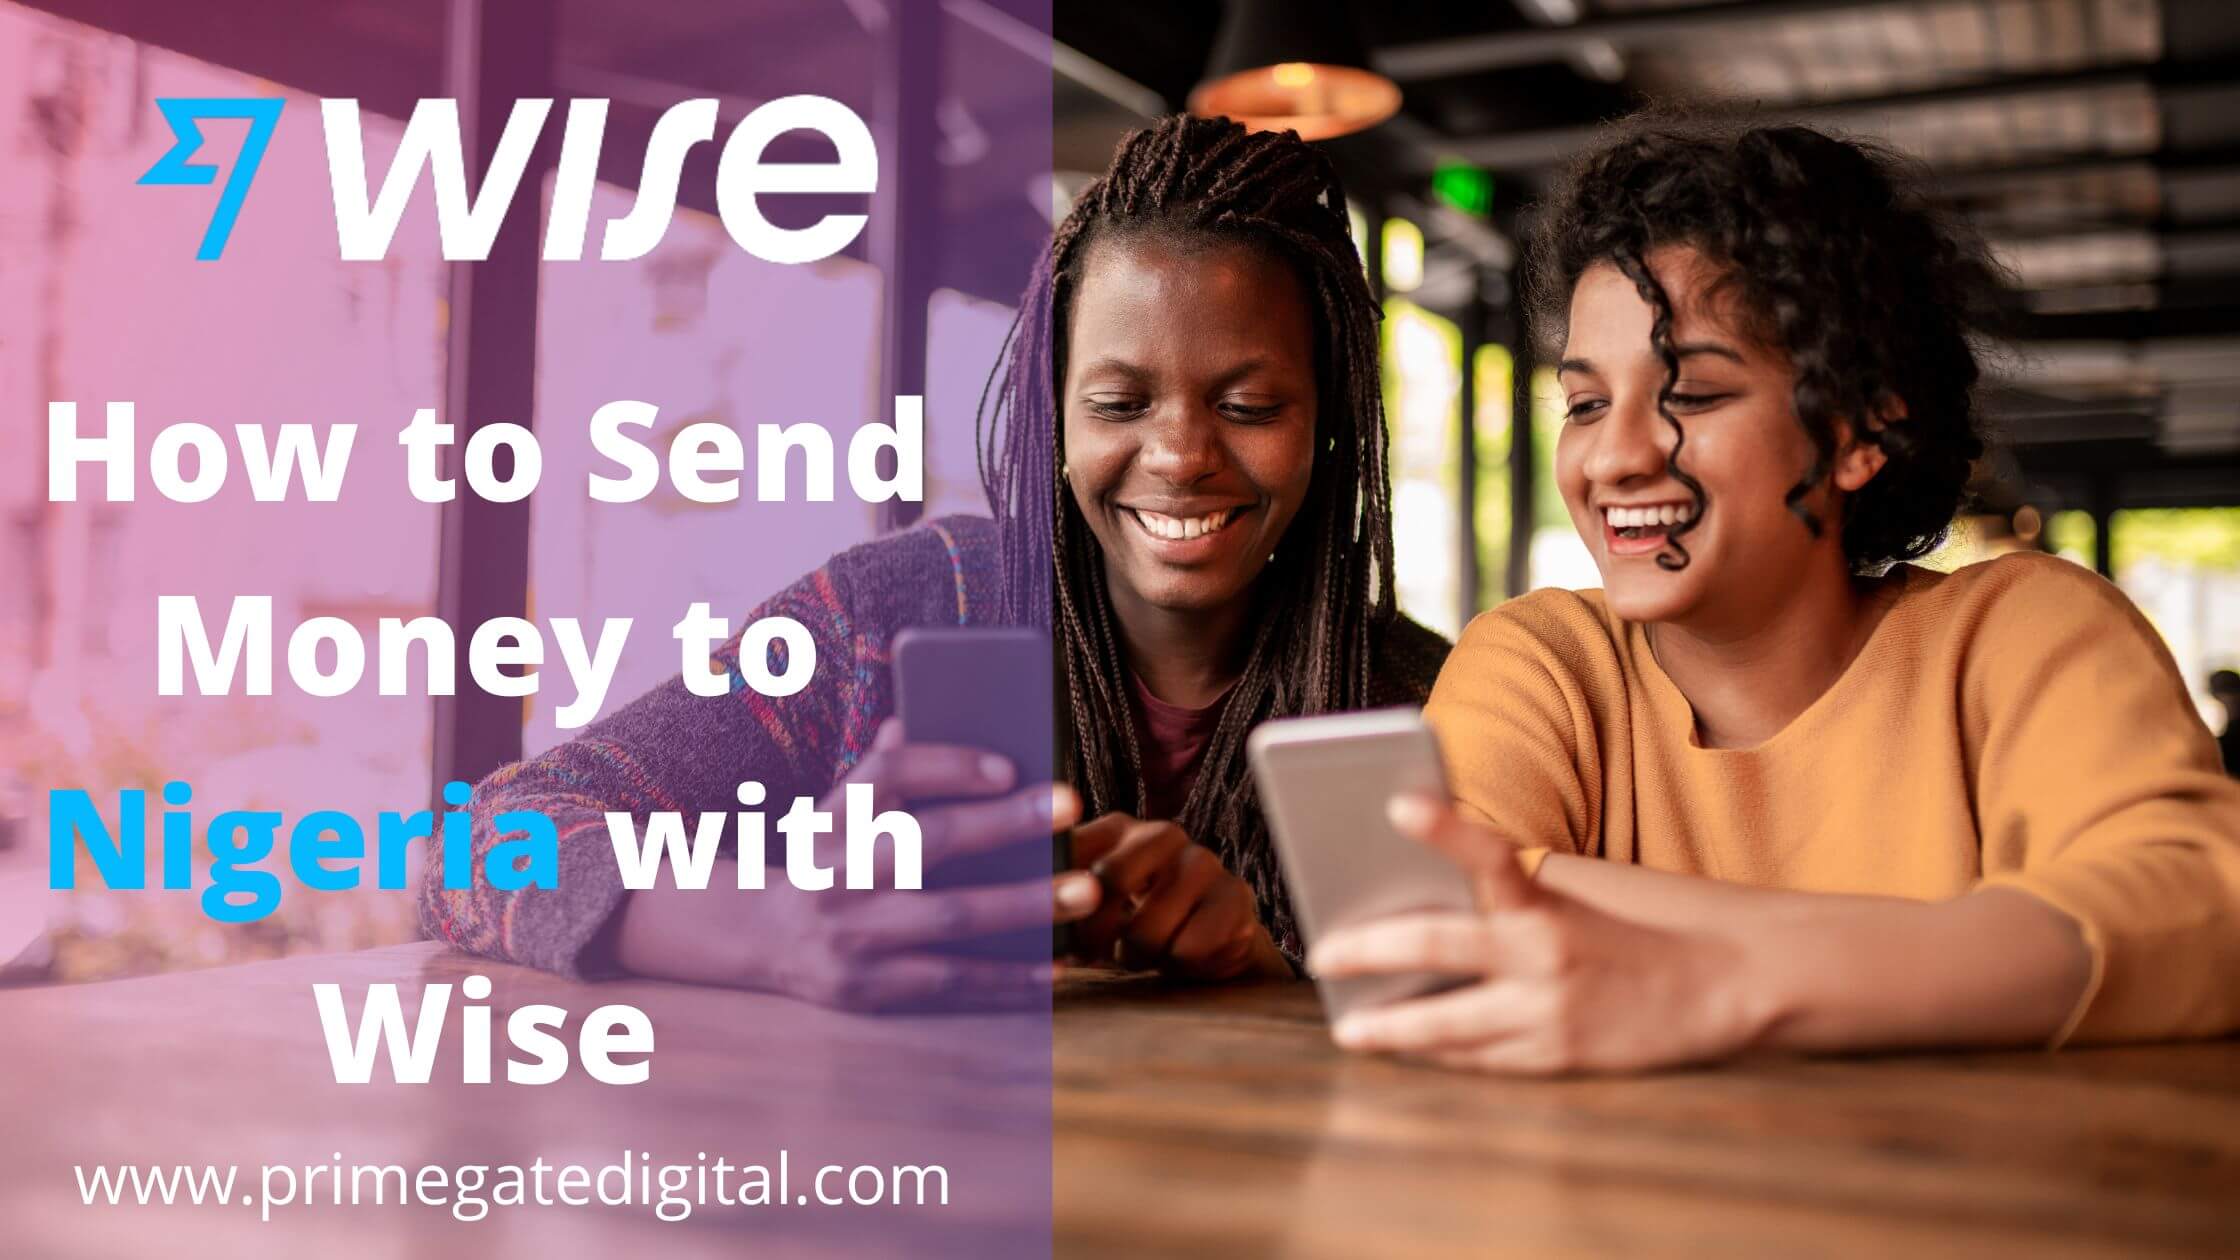 Send Money to Nigeria with Wise